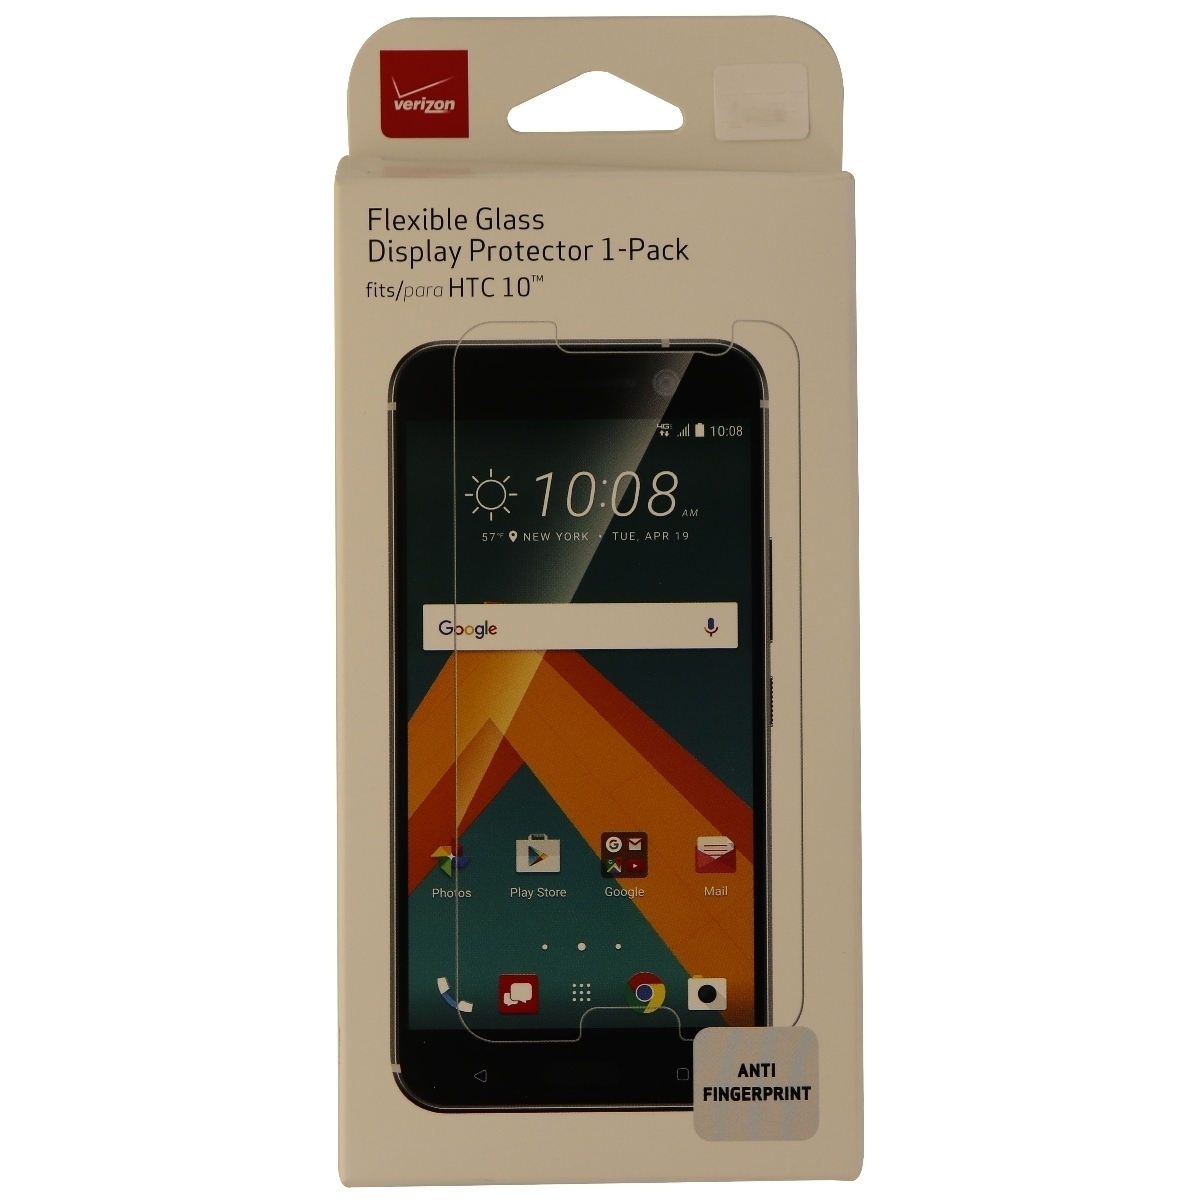 Verizon Flexible Glass Display Protector 1 Pack For HTC 10 - Clear Clarity